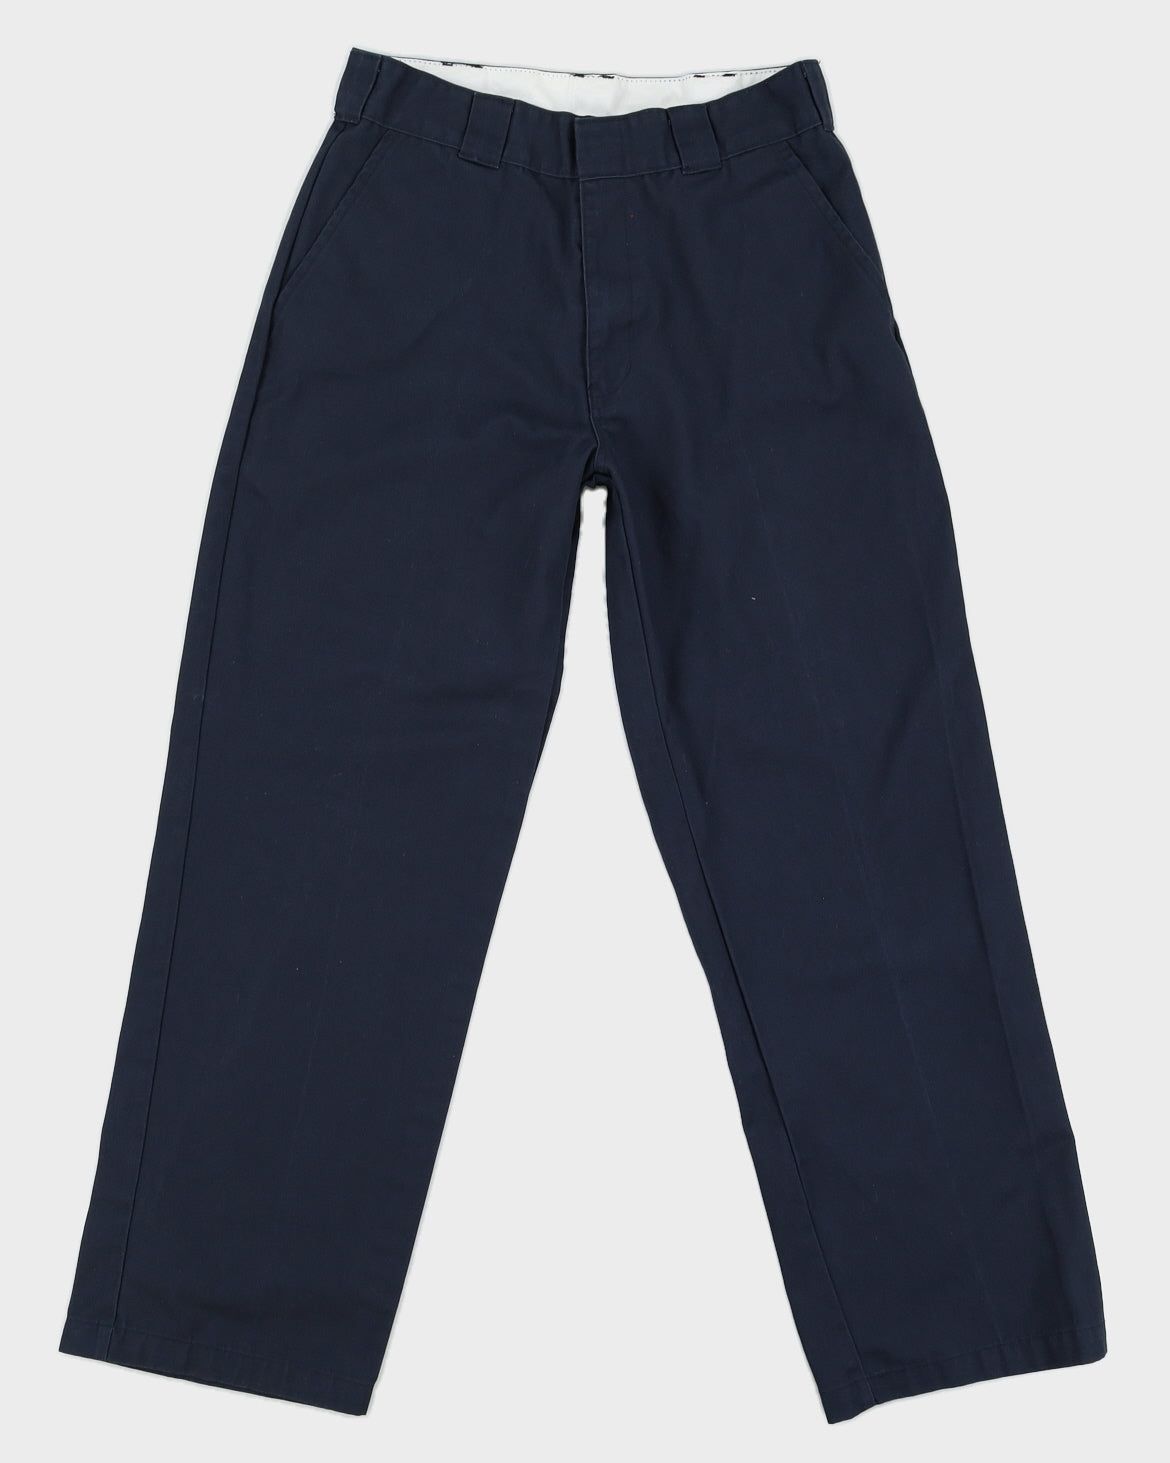 00s Dickies Blue Navy Trousers - W33 L31